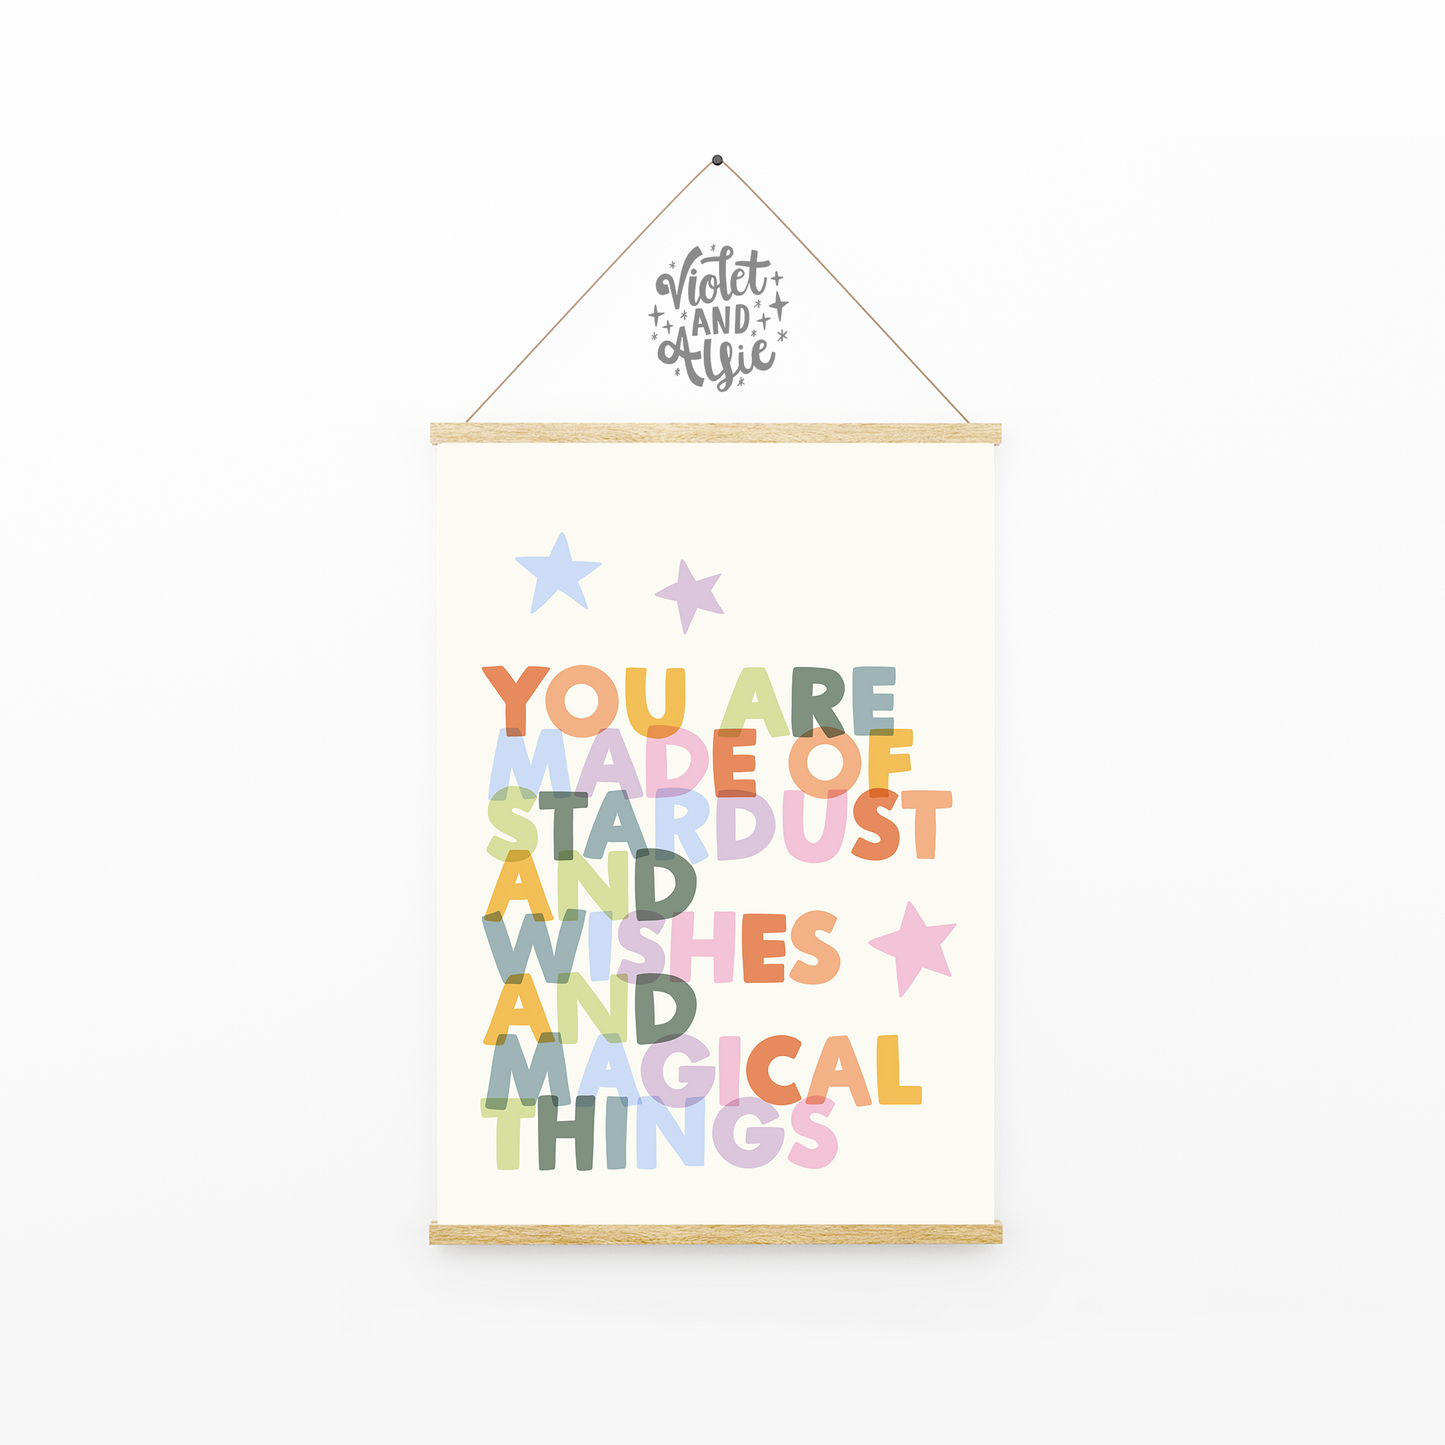 You are made of Stardust and wishes and magical things" This inspirational print in warm pastel tones is fab to display is a little one's bedroom or playroom- or as part of an eclectic gallery wall.  Boho kid's room wall art, empowering quote print, colourful home prints, boho children's decor